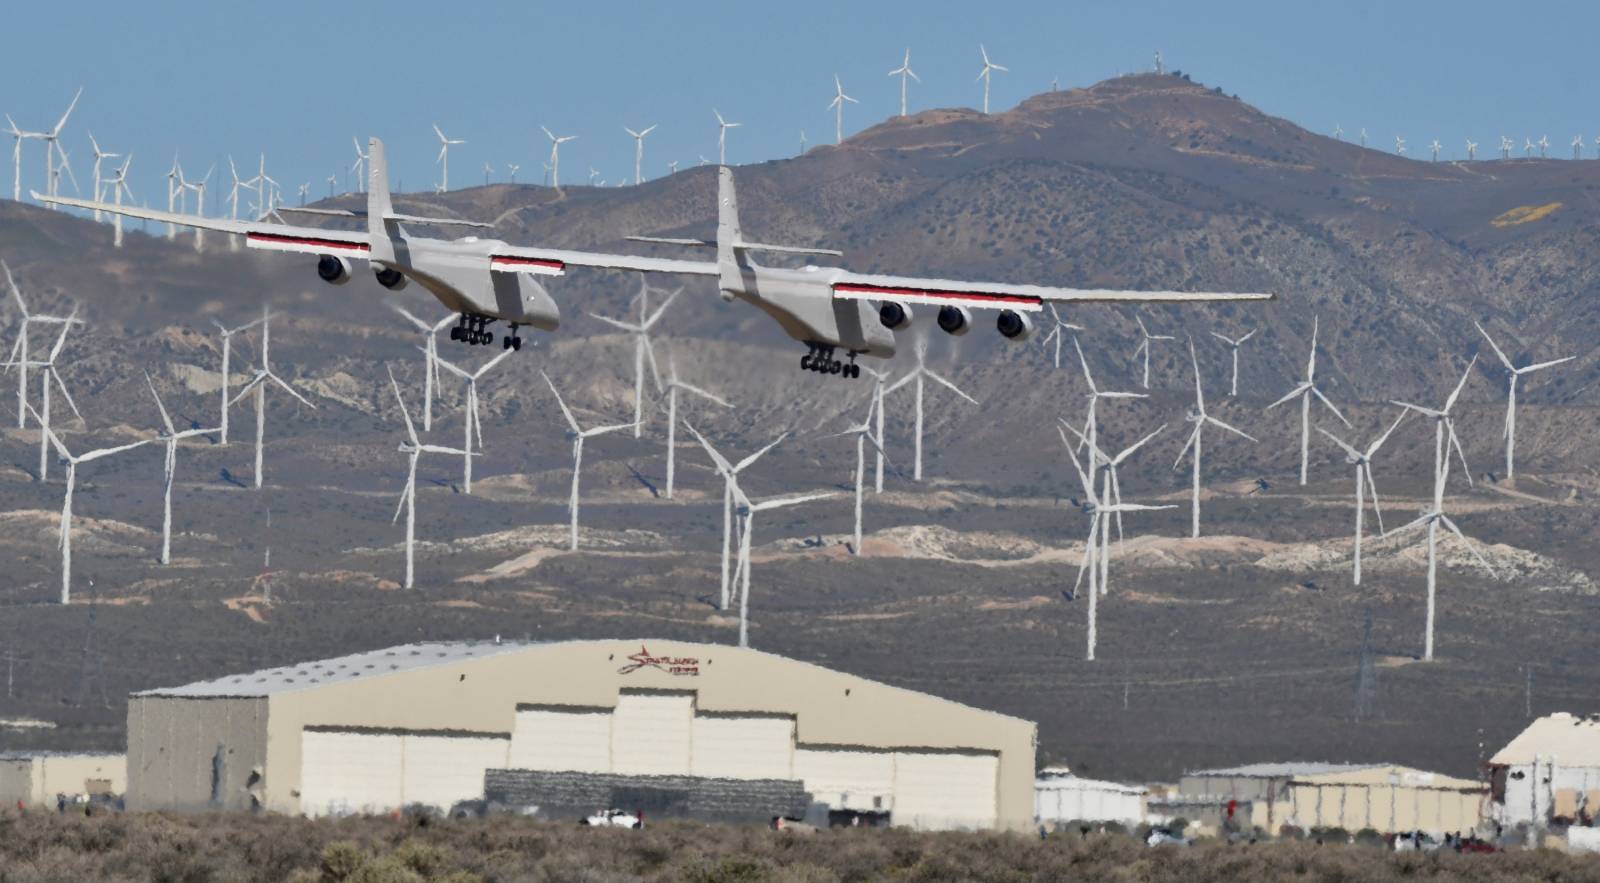 The world's largest airplane, built by the late Paul Allen's company Stratolaunch Systems, lands during its first test flight in Mojave